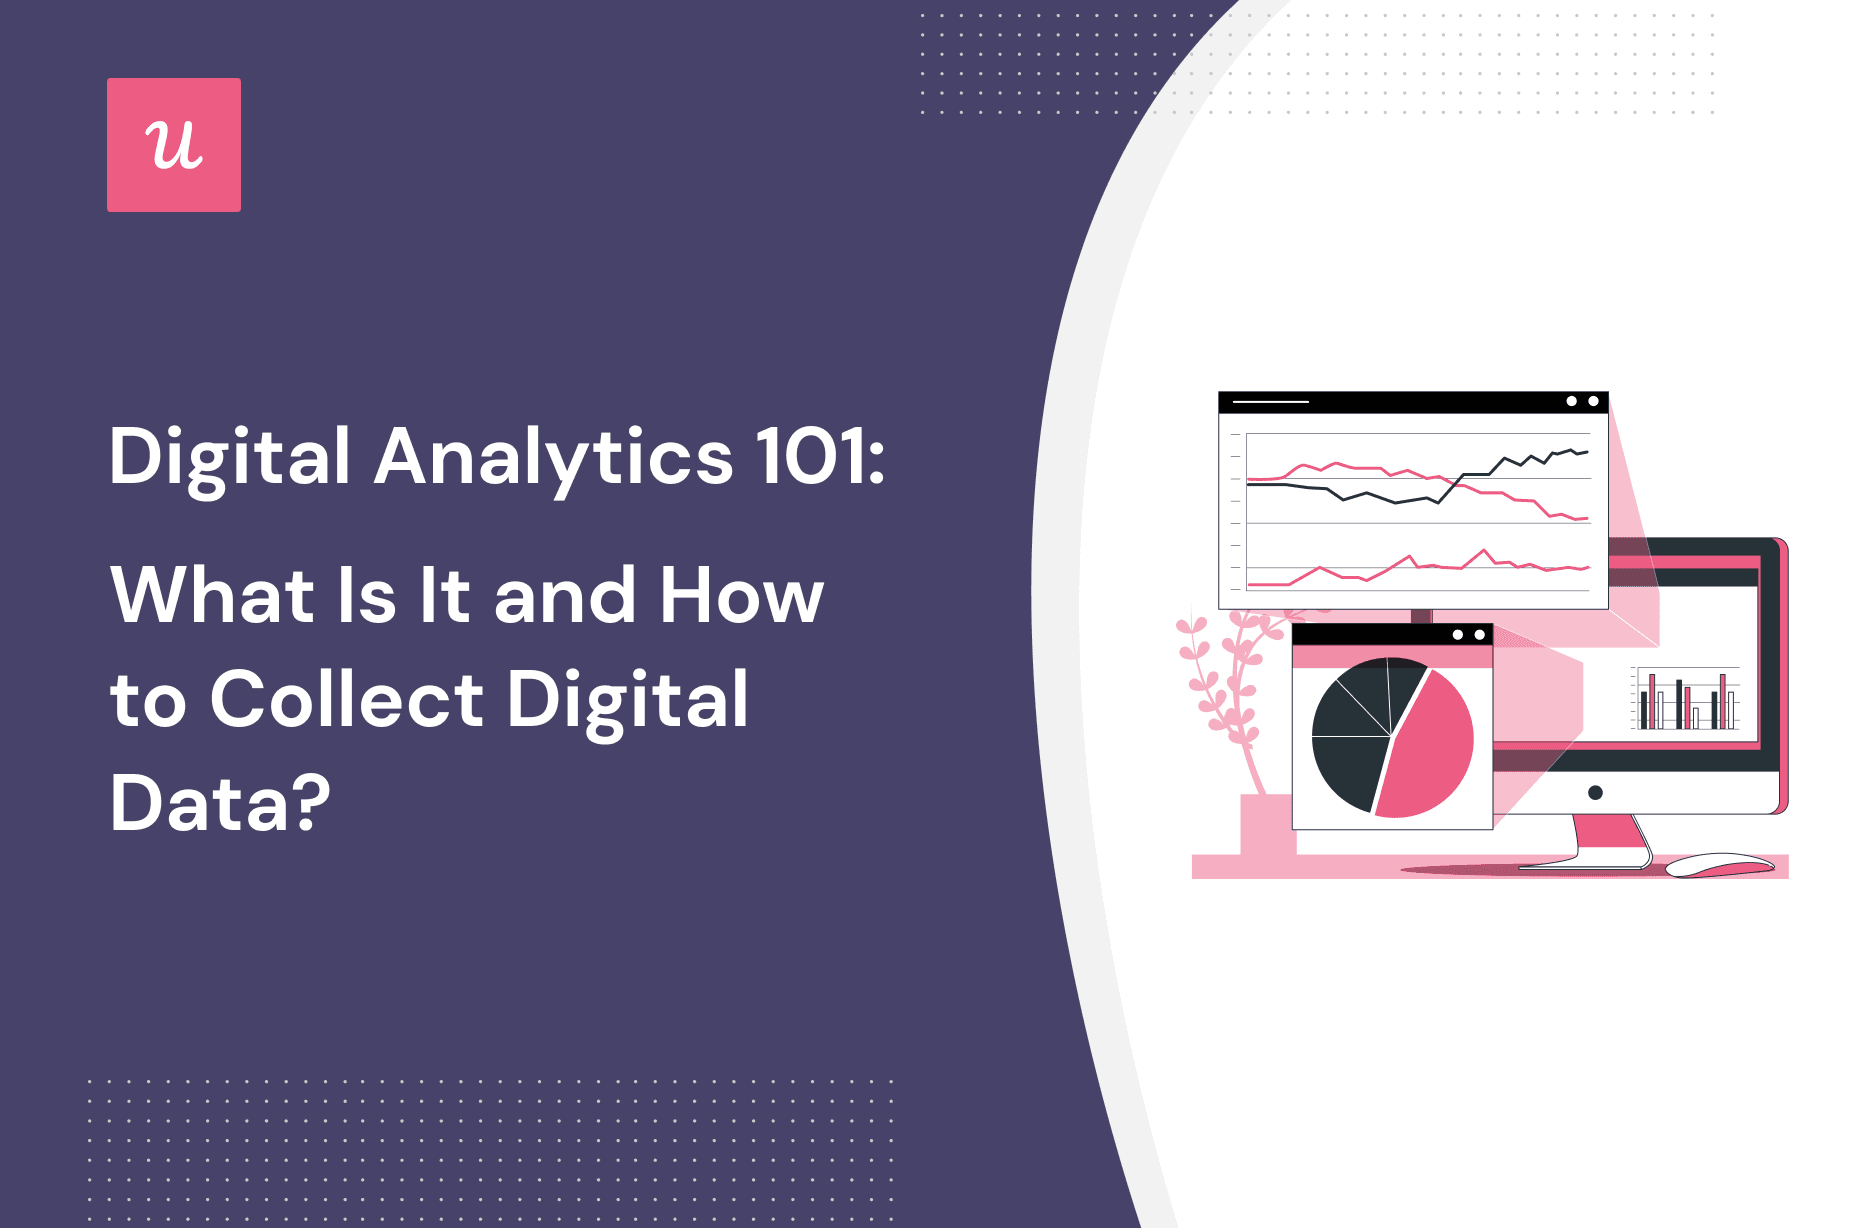 Digital Analytics 101: What Is It and How to Collect Digital Data? cover